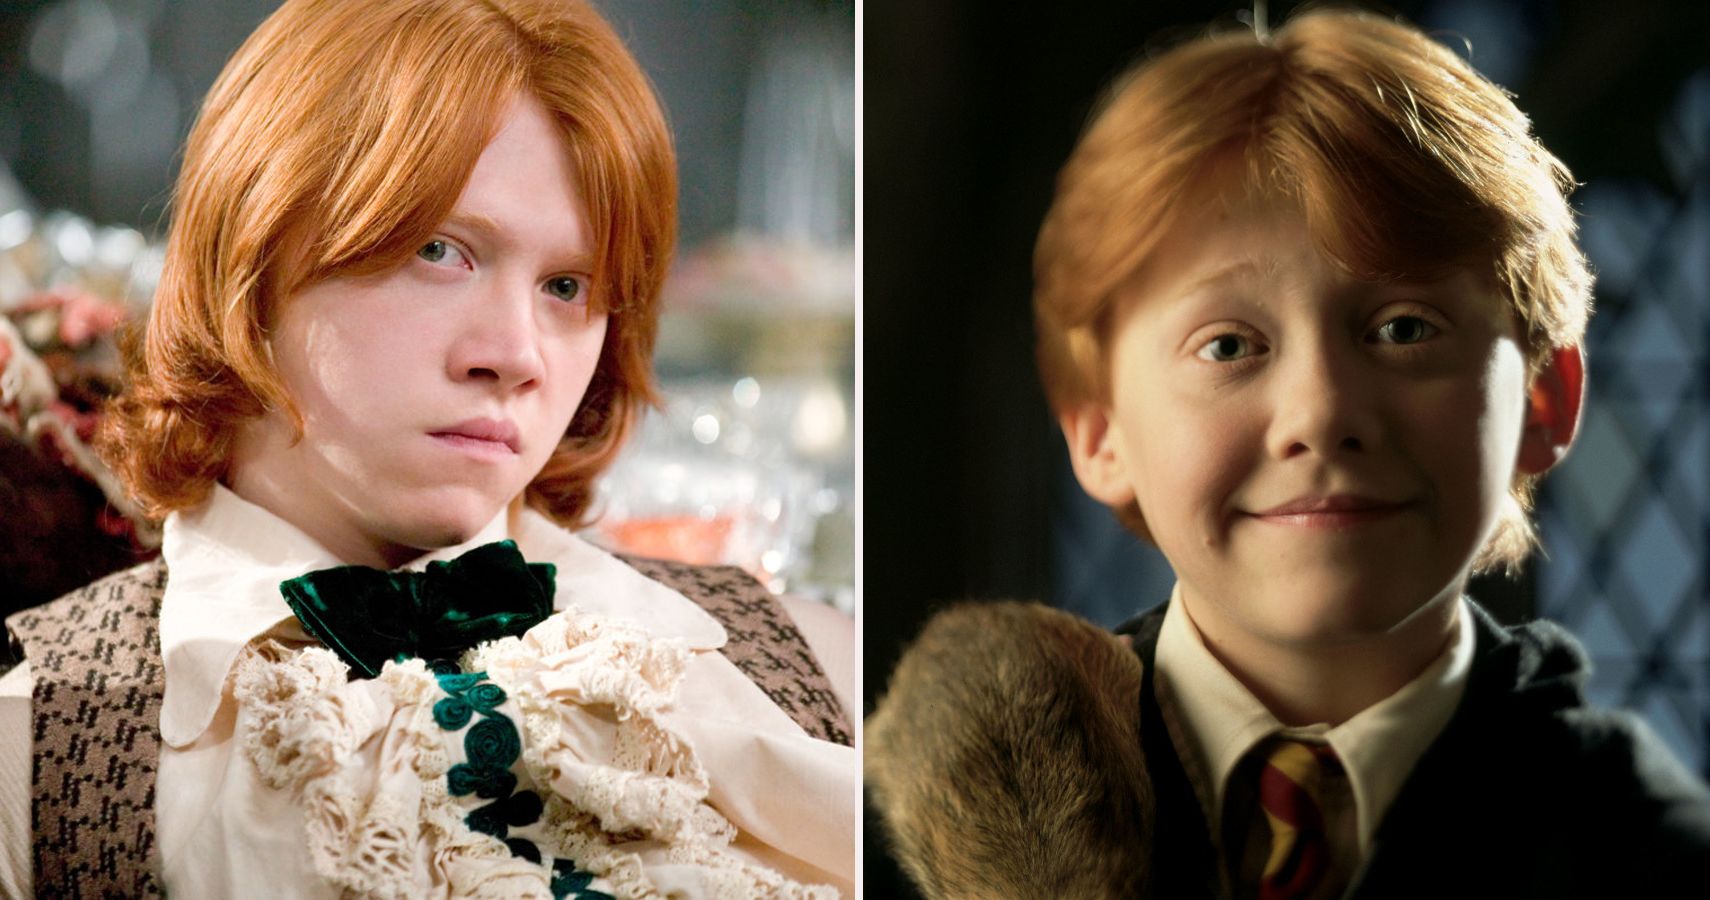 Image comparing Ron Weasley from childhood to a teenager. 